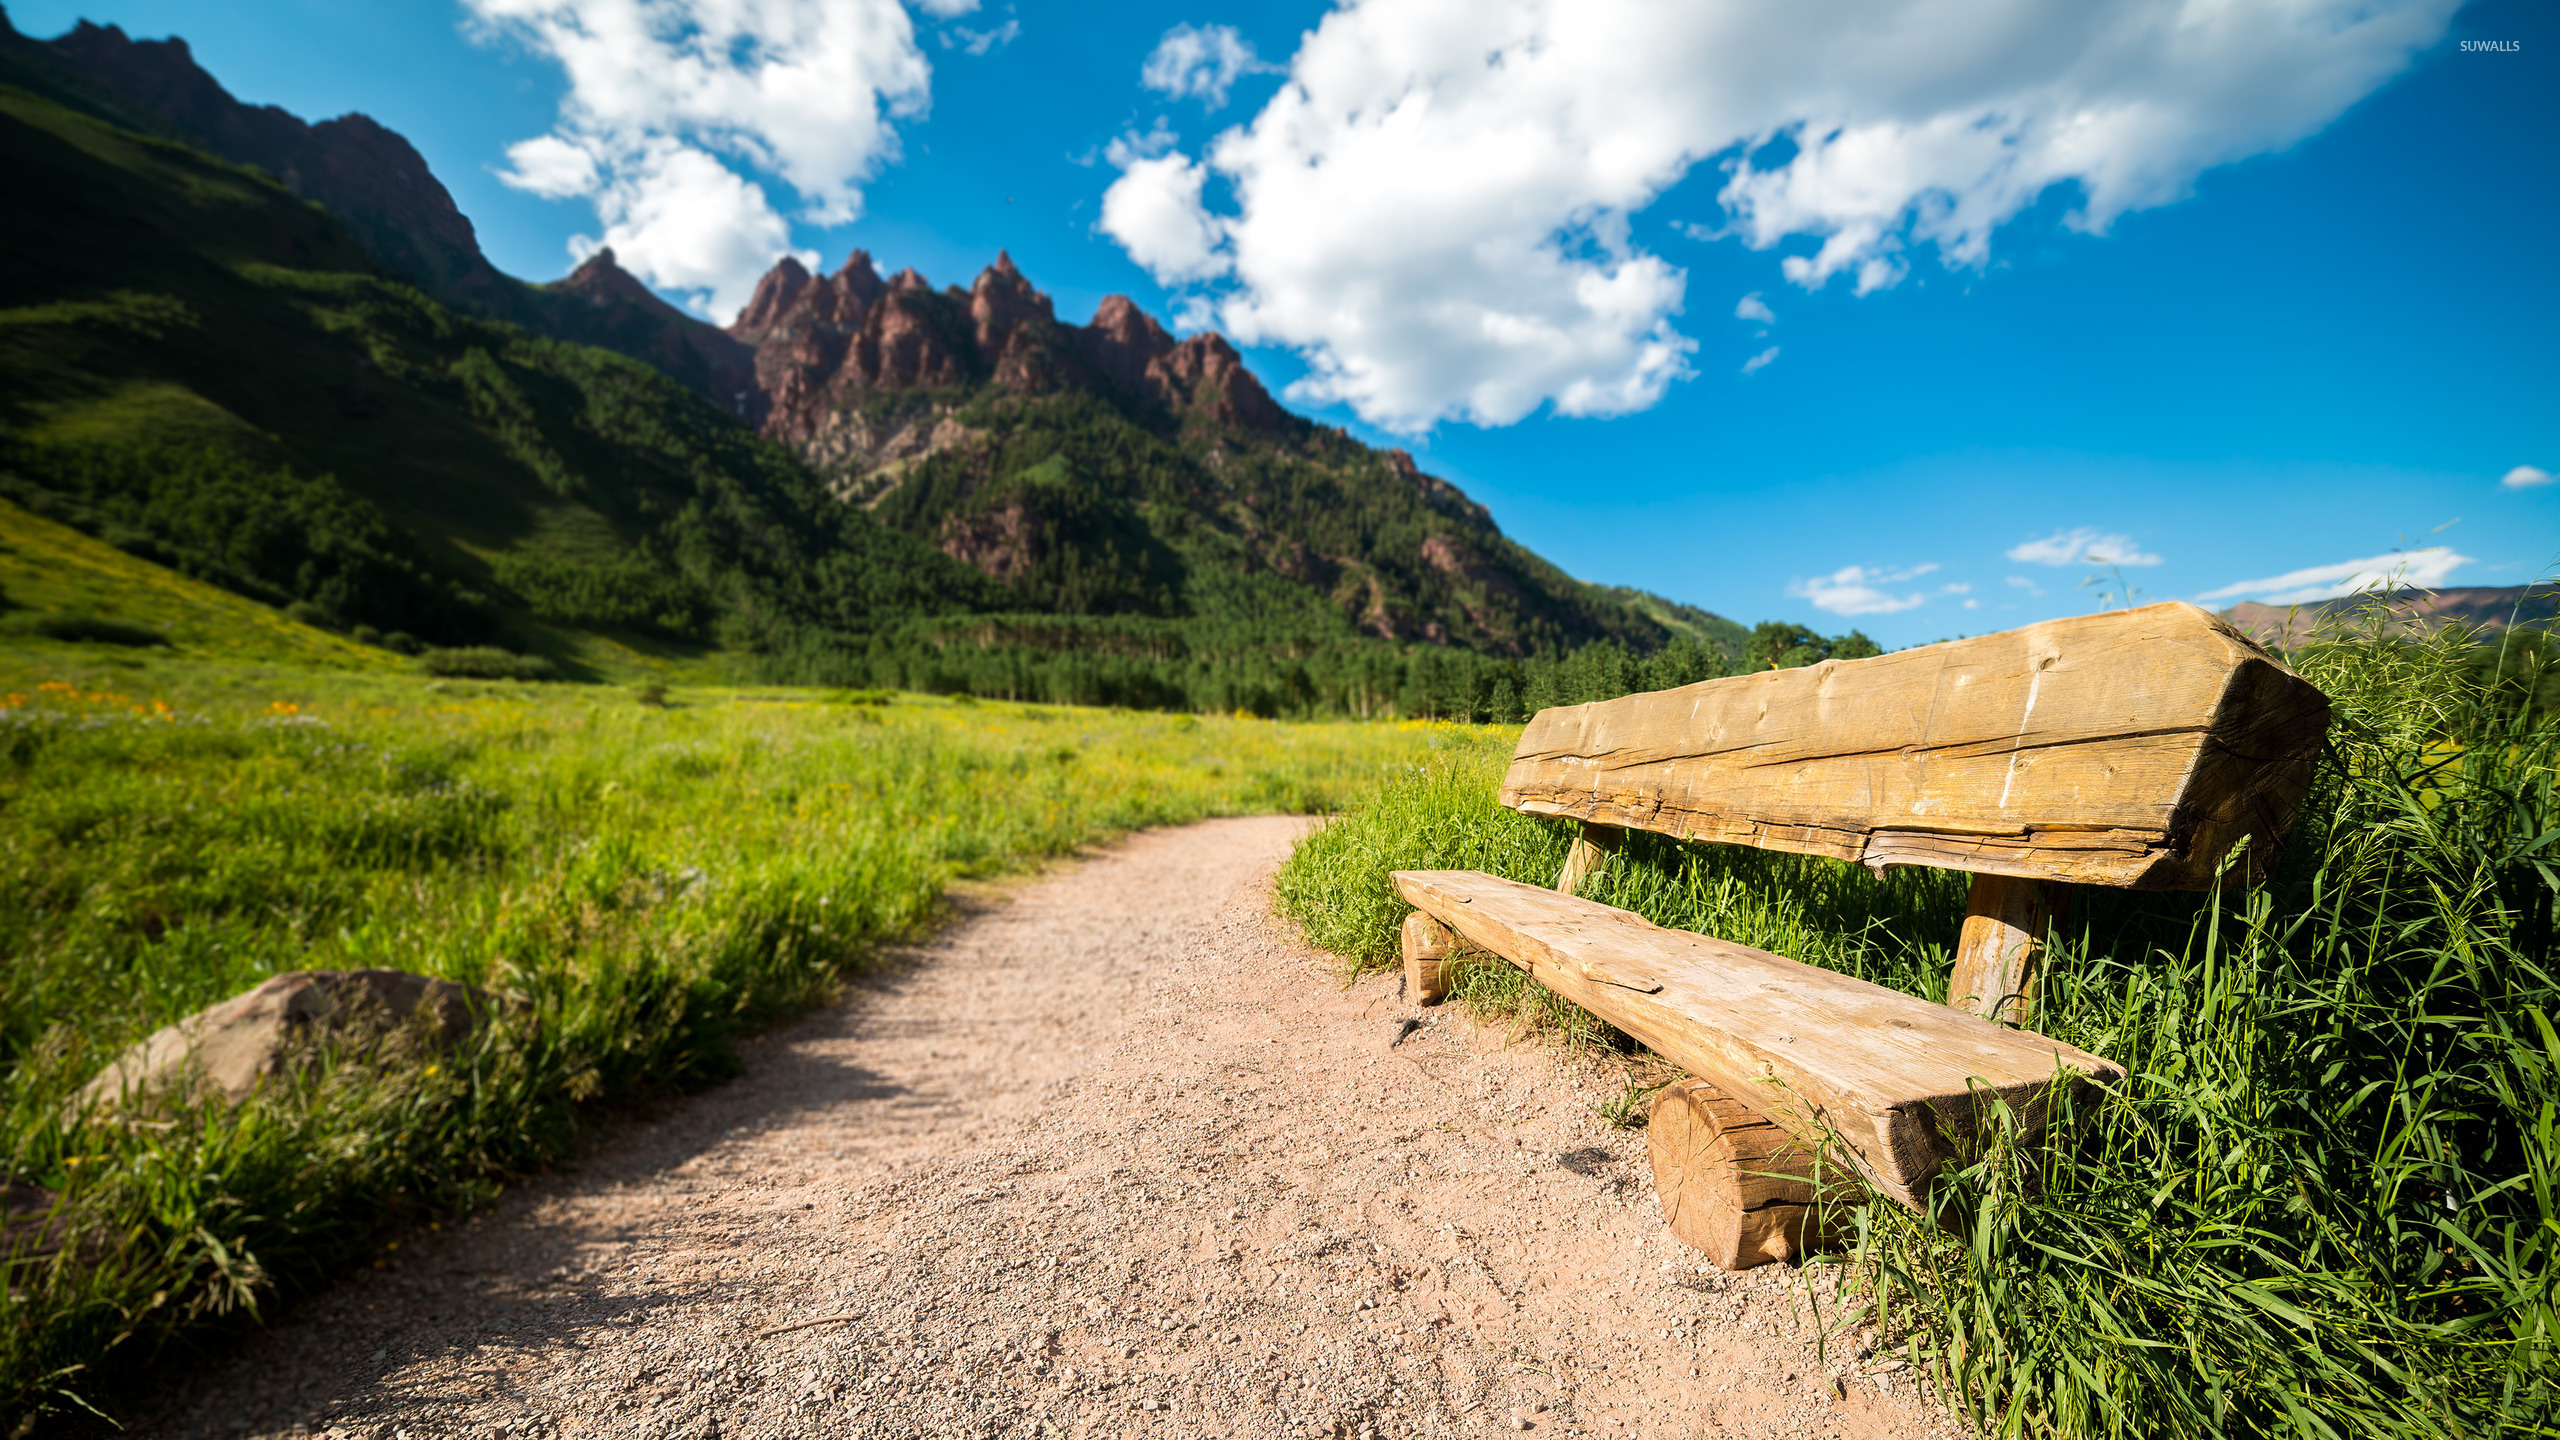 Log bench on the path to the mountains wallpaper - Nature wallpapers ...